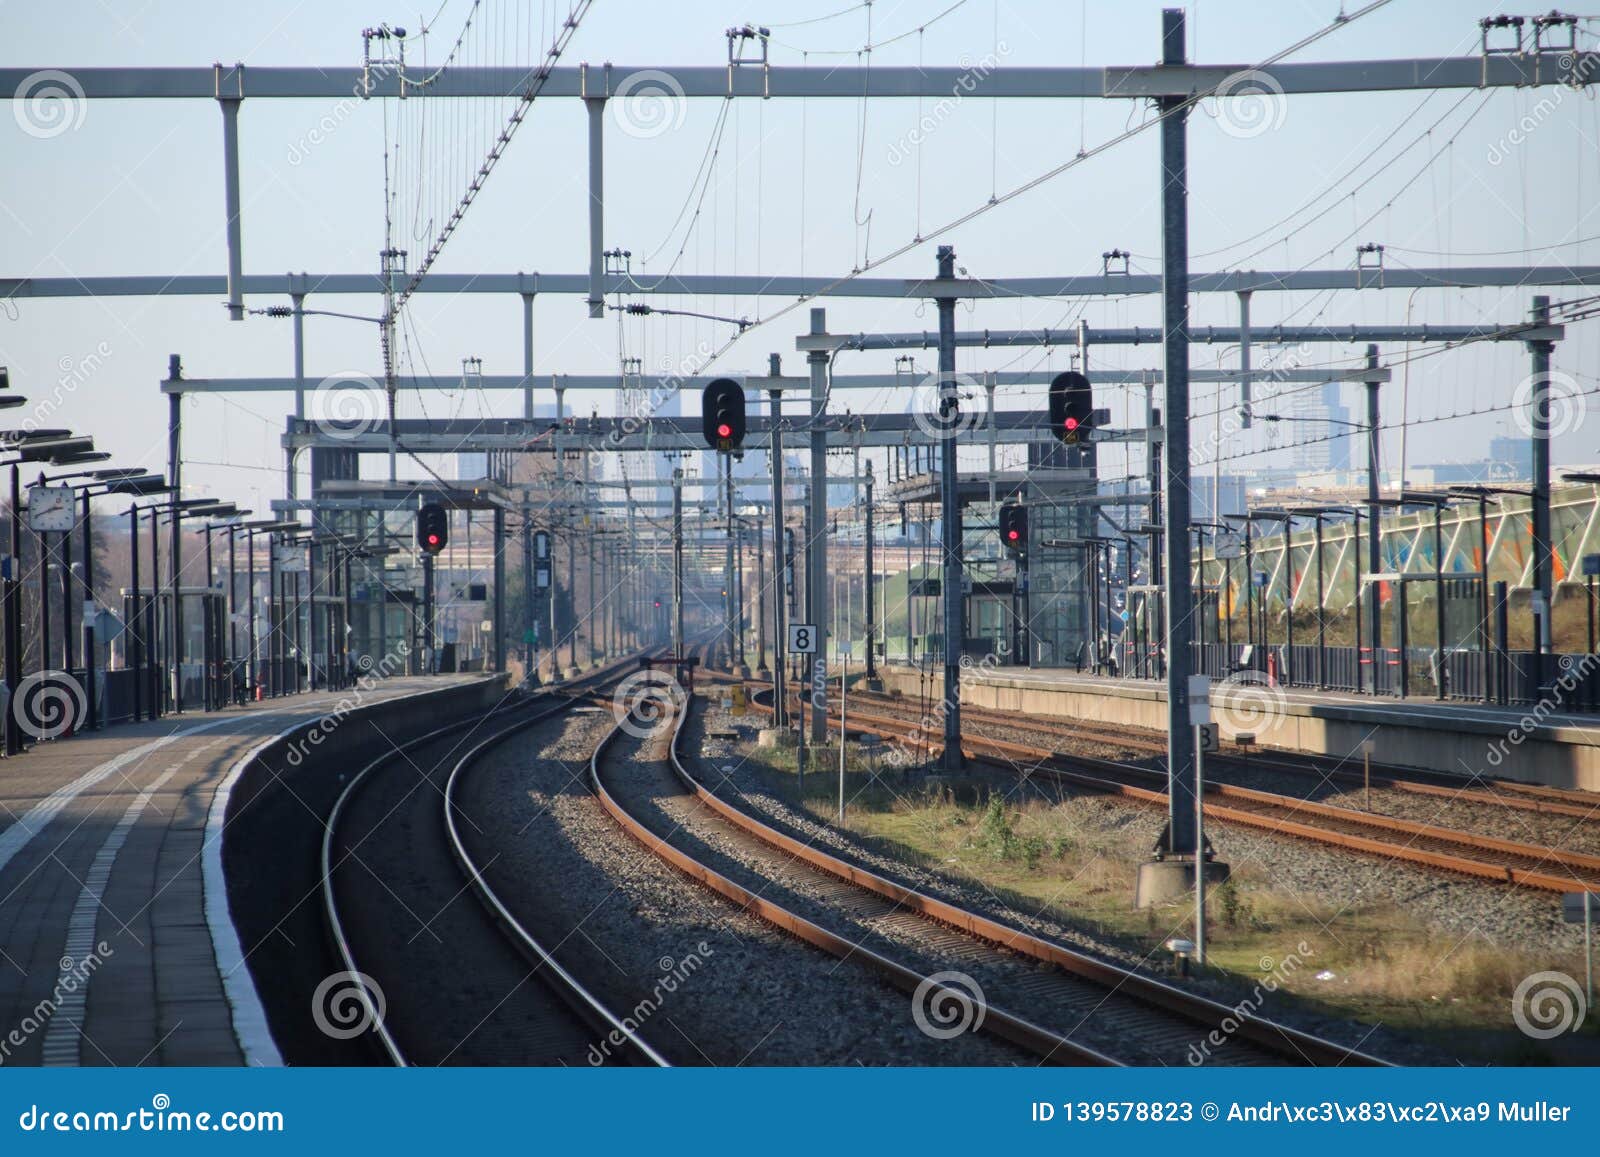 Railroad Track at Train Station Den Haag Ypenburg in the Hague in the ...